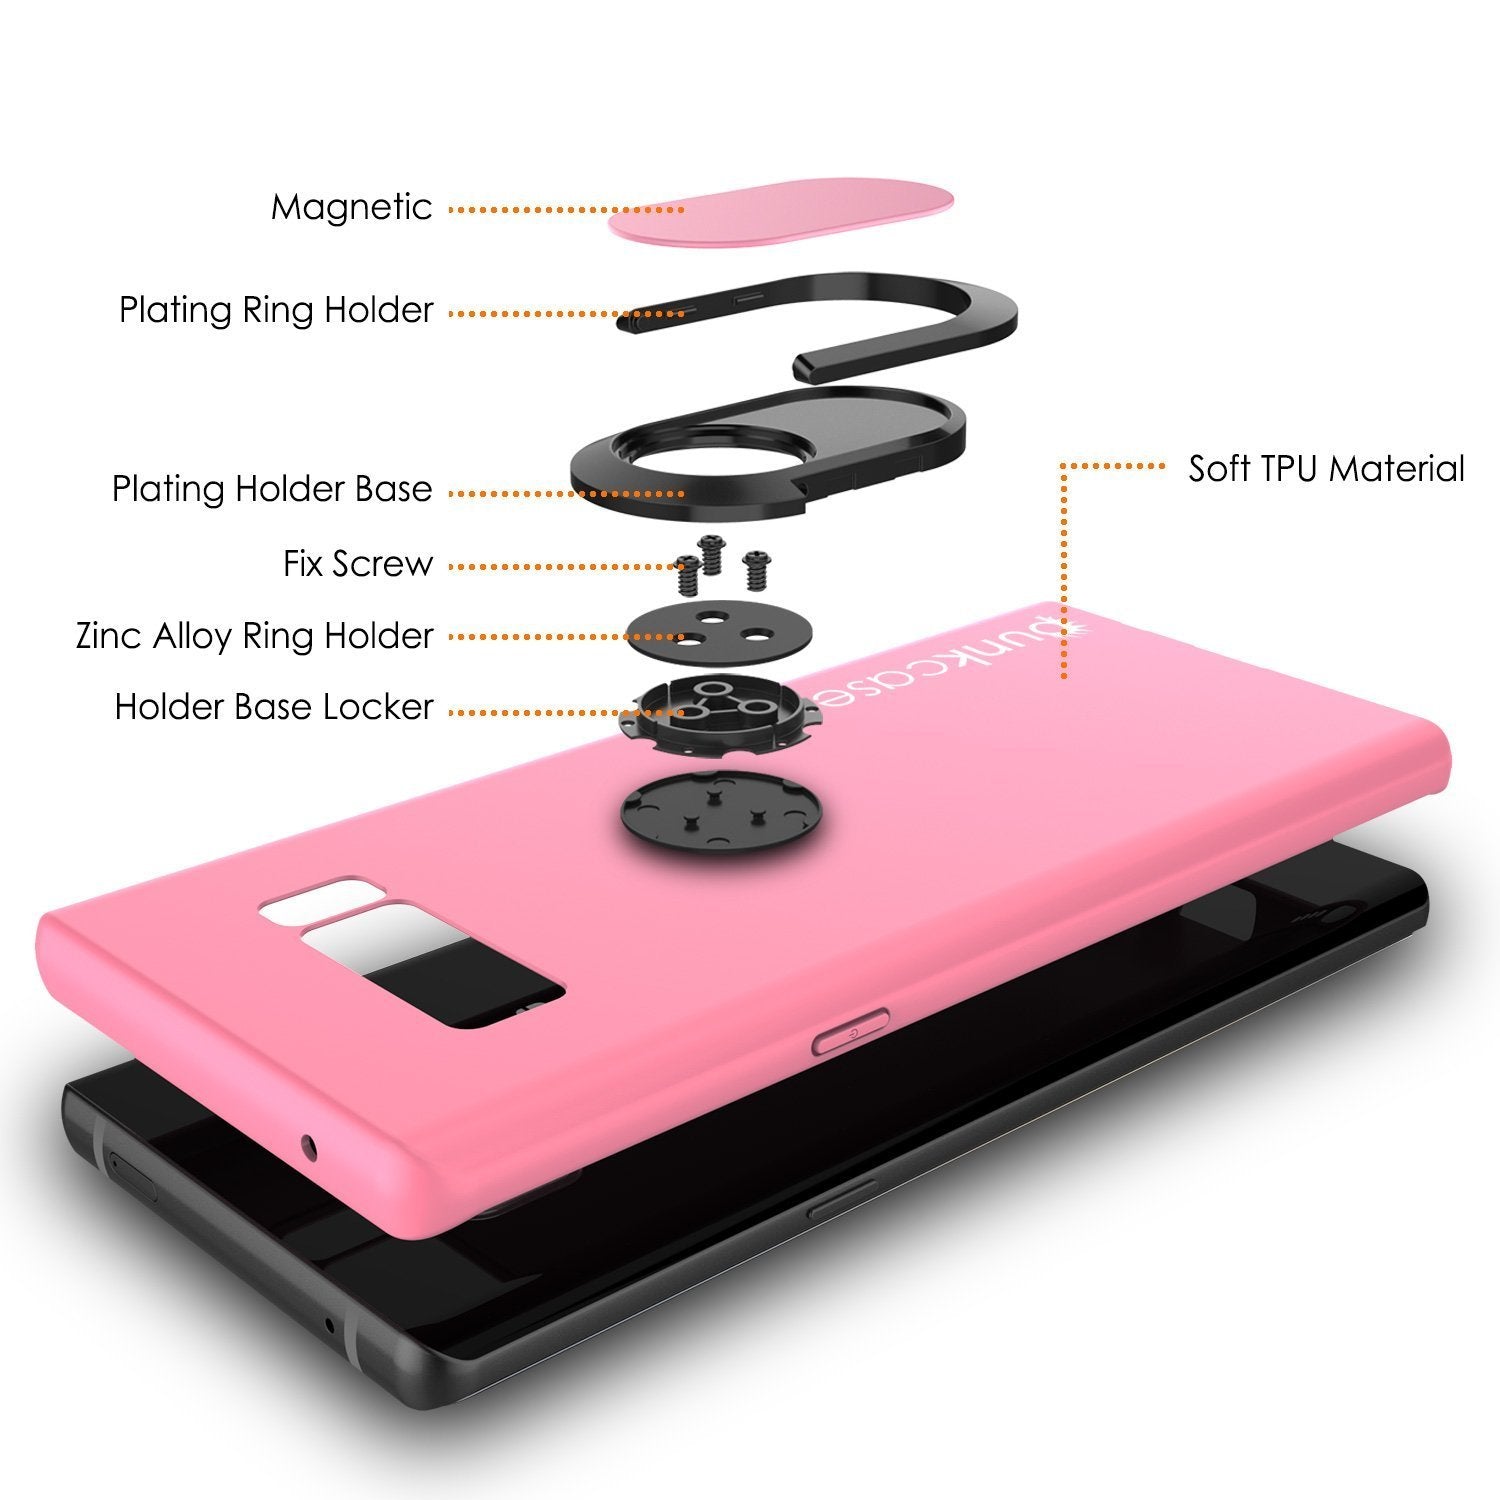 Galaxy Note 8 case Magnetix Protective TPU Cover W/ Kickstand, Pink